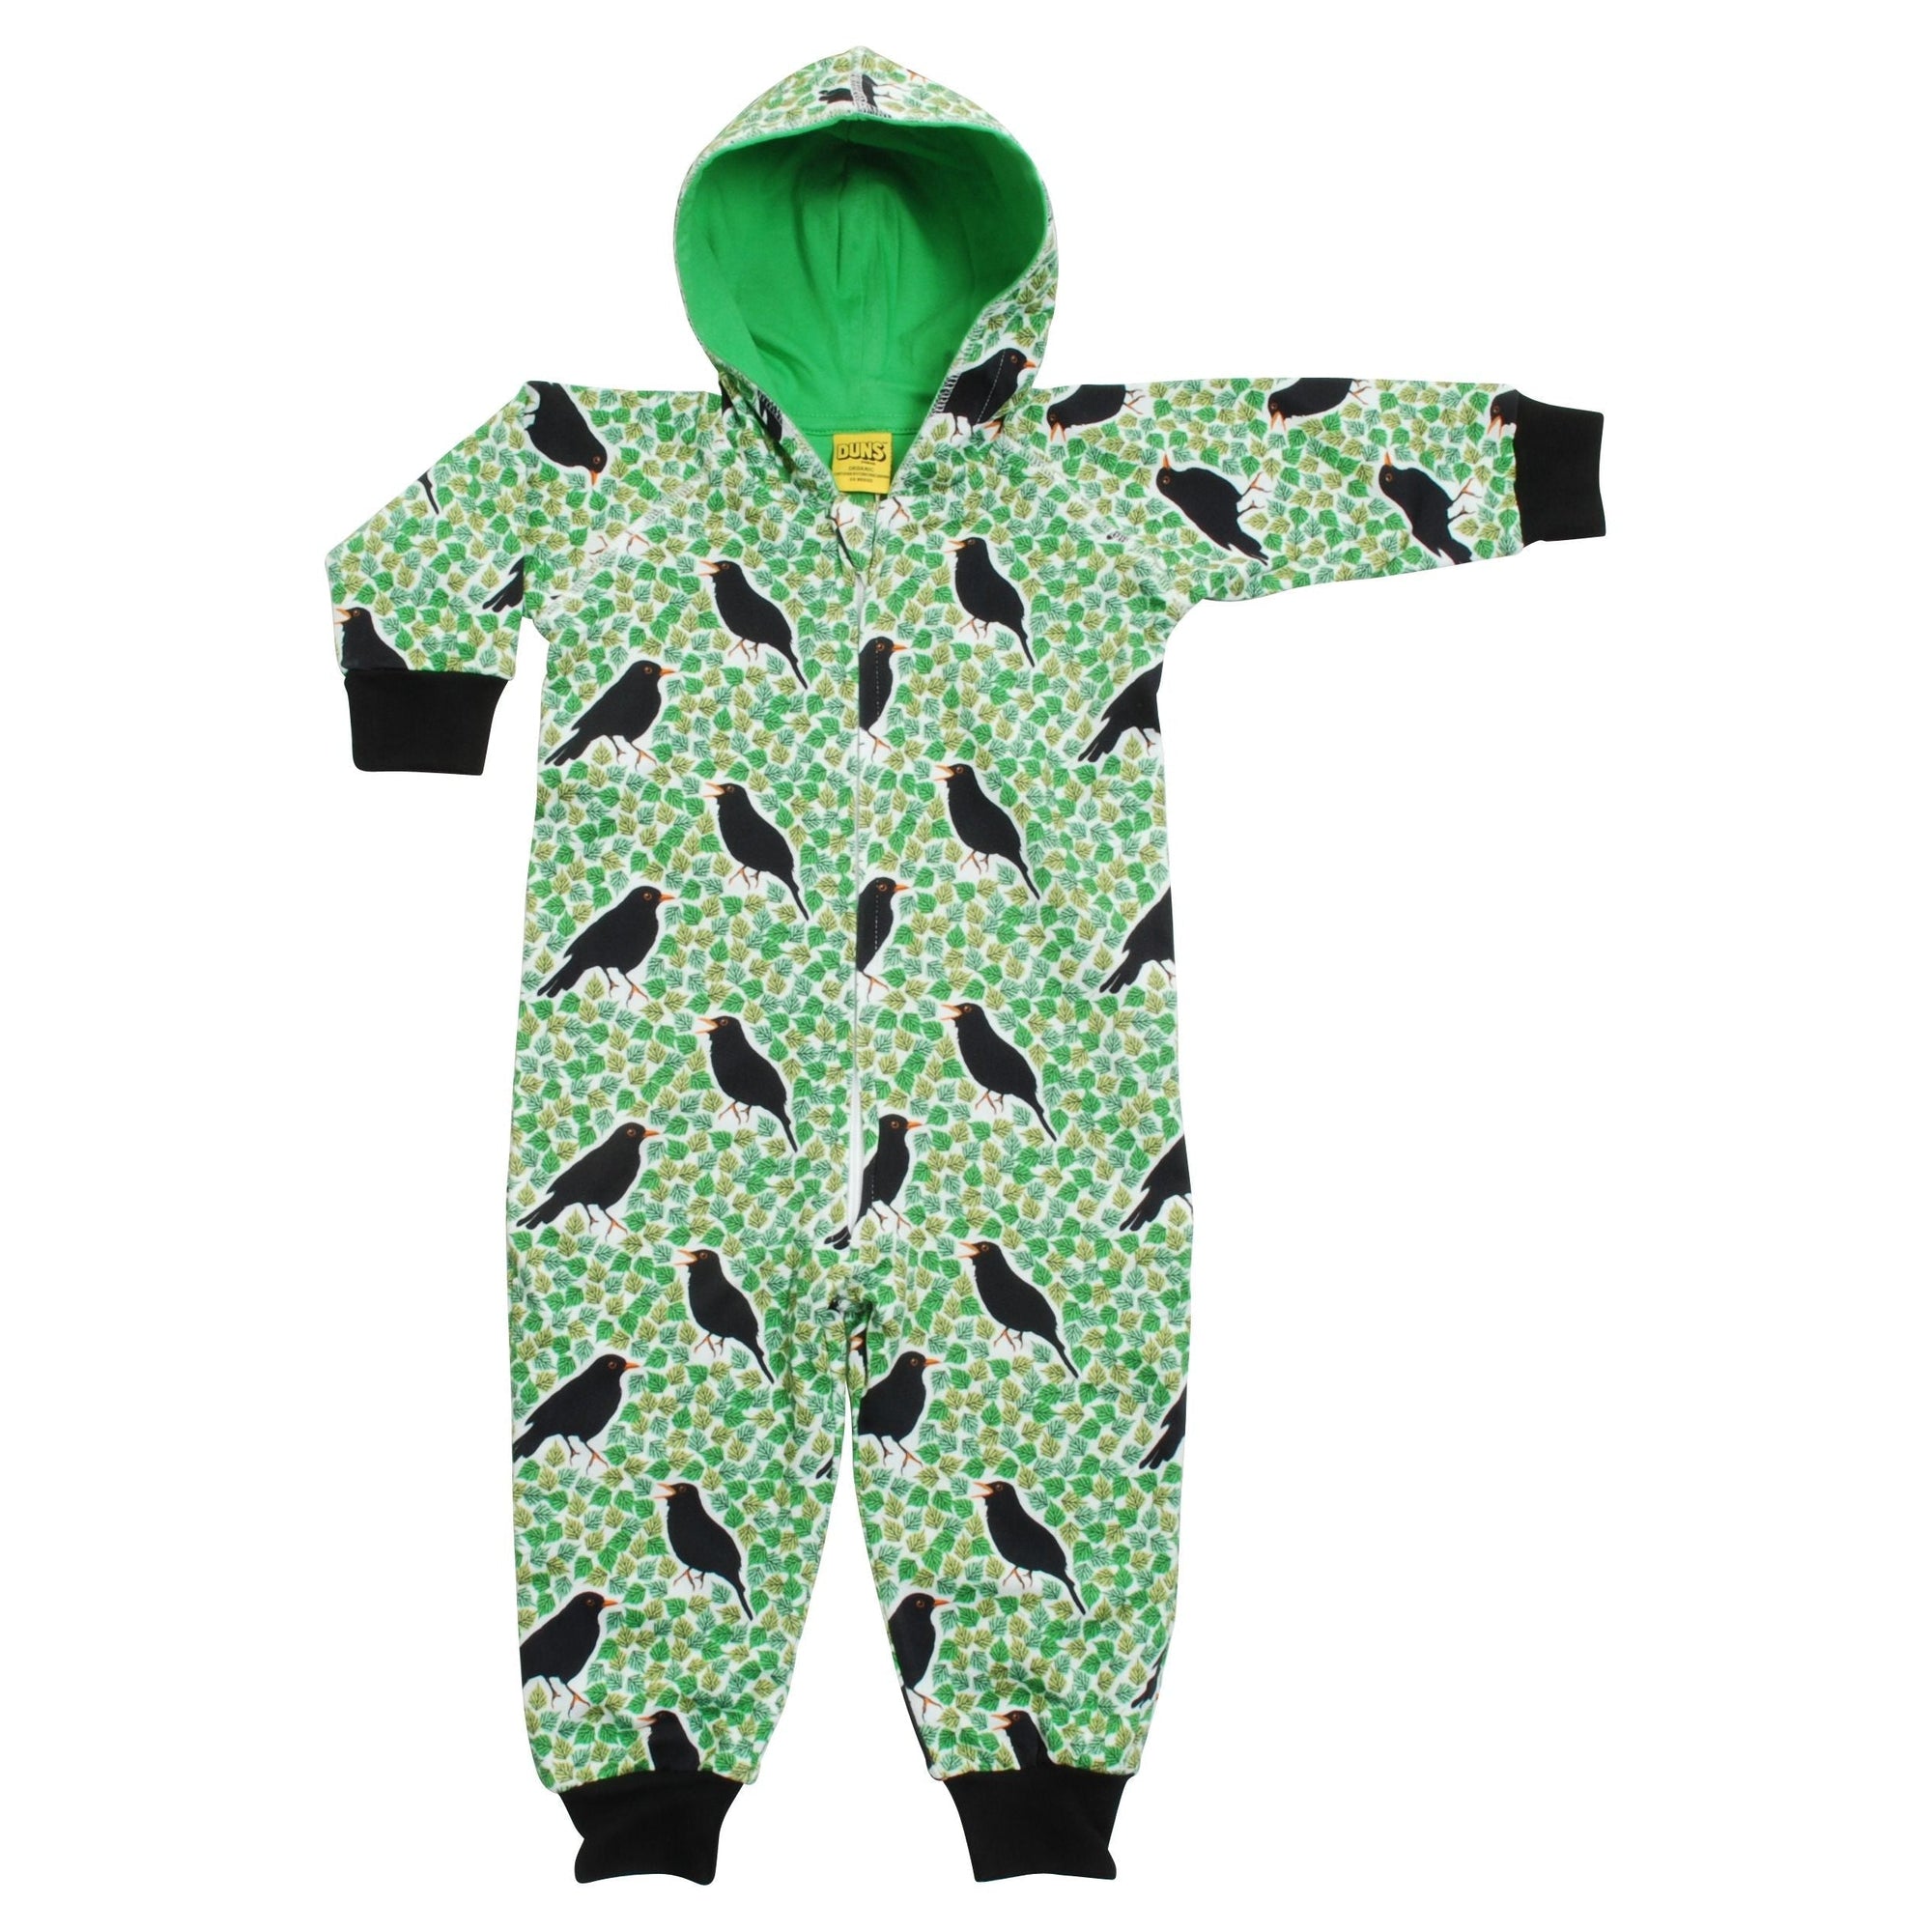 Black Bird - Green Hooded Lined Suit - 2 Left Size 6-12 months & 1-2 years-Duns Sweden-Modern Rascals